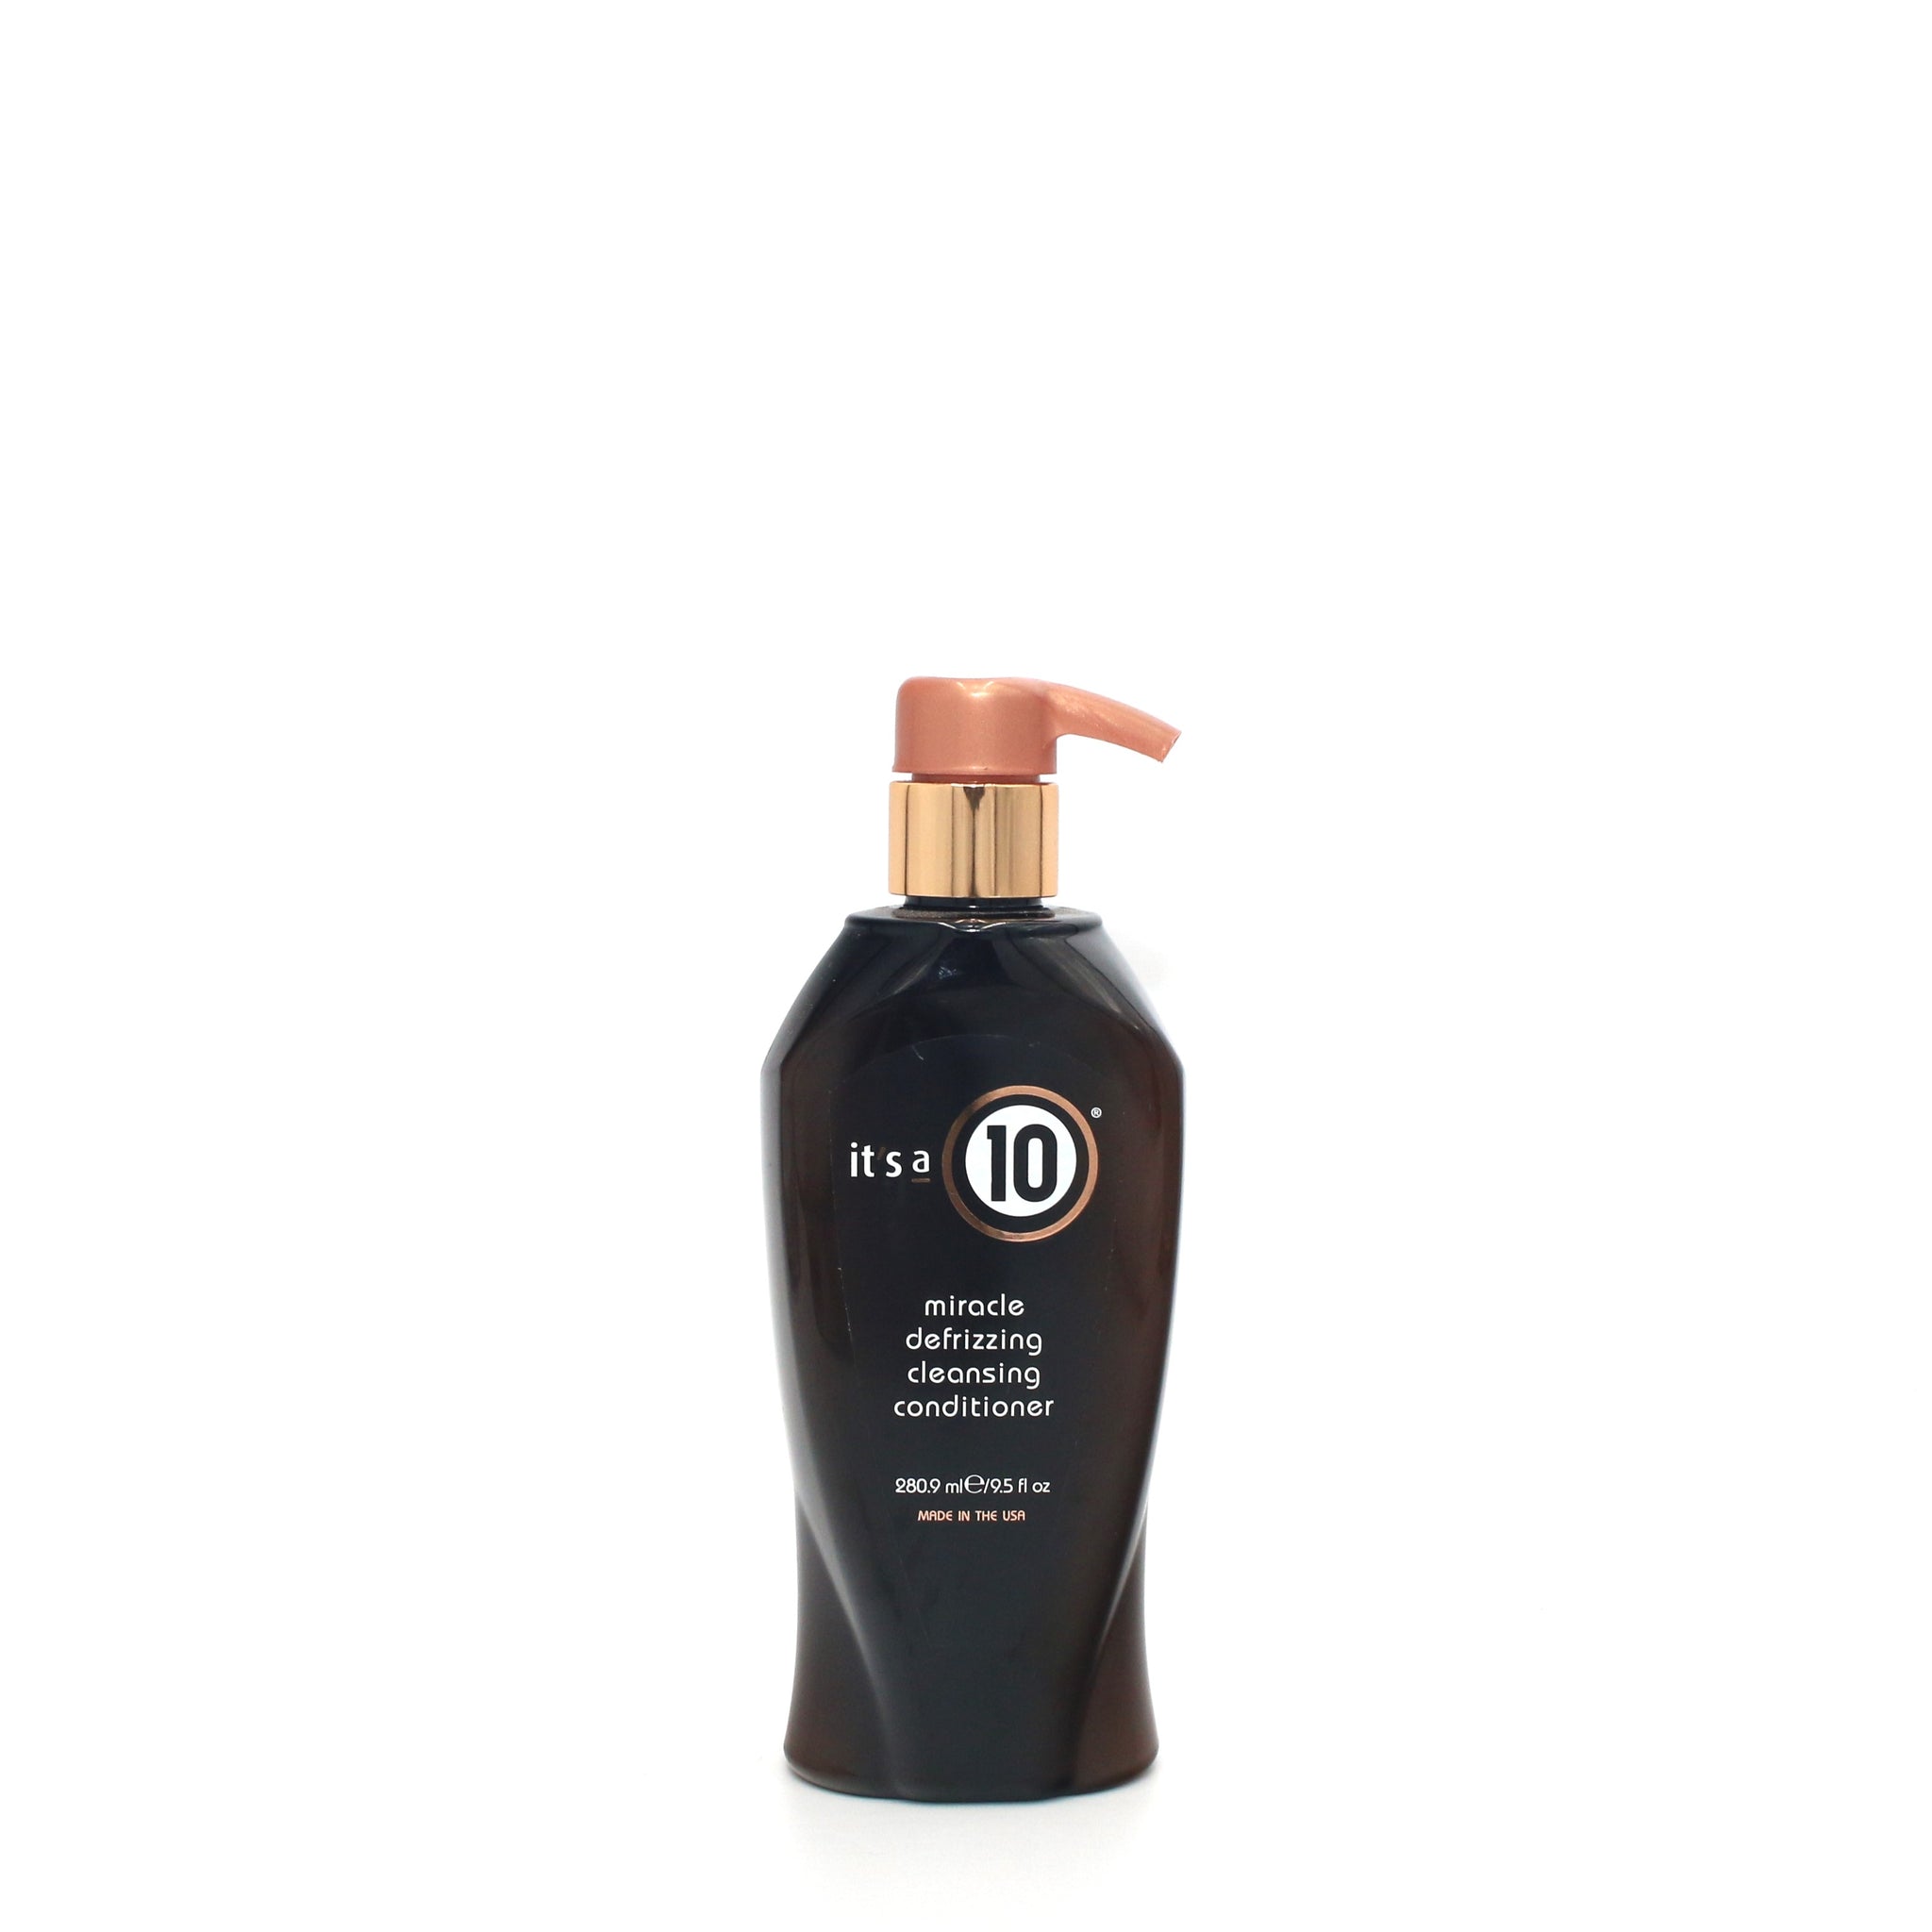 IT'S A 10 Miracle Defrizzing Cleansing Conditioner 9.5 oz